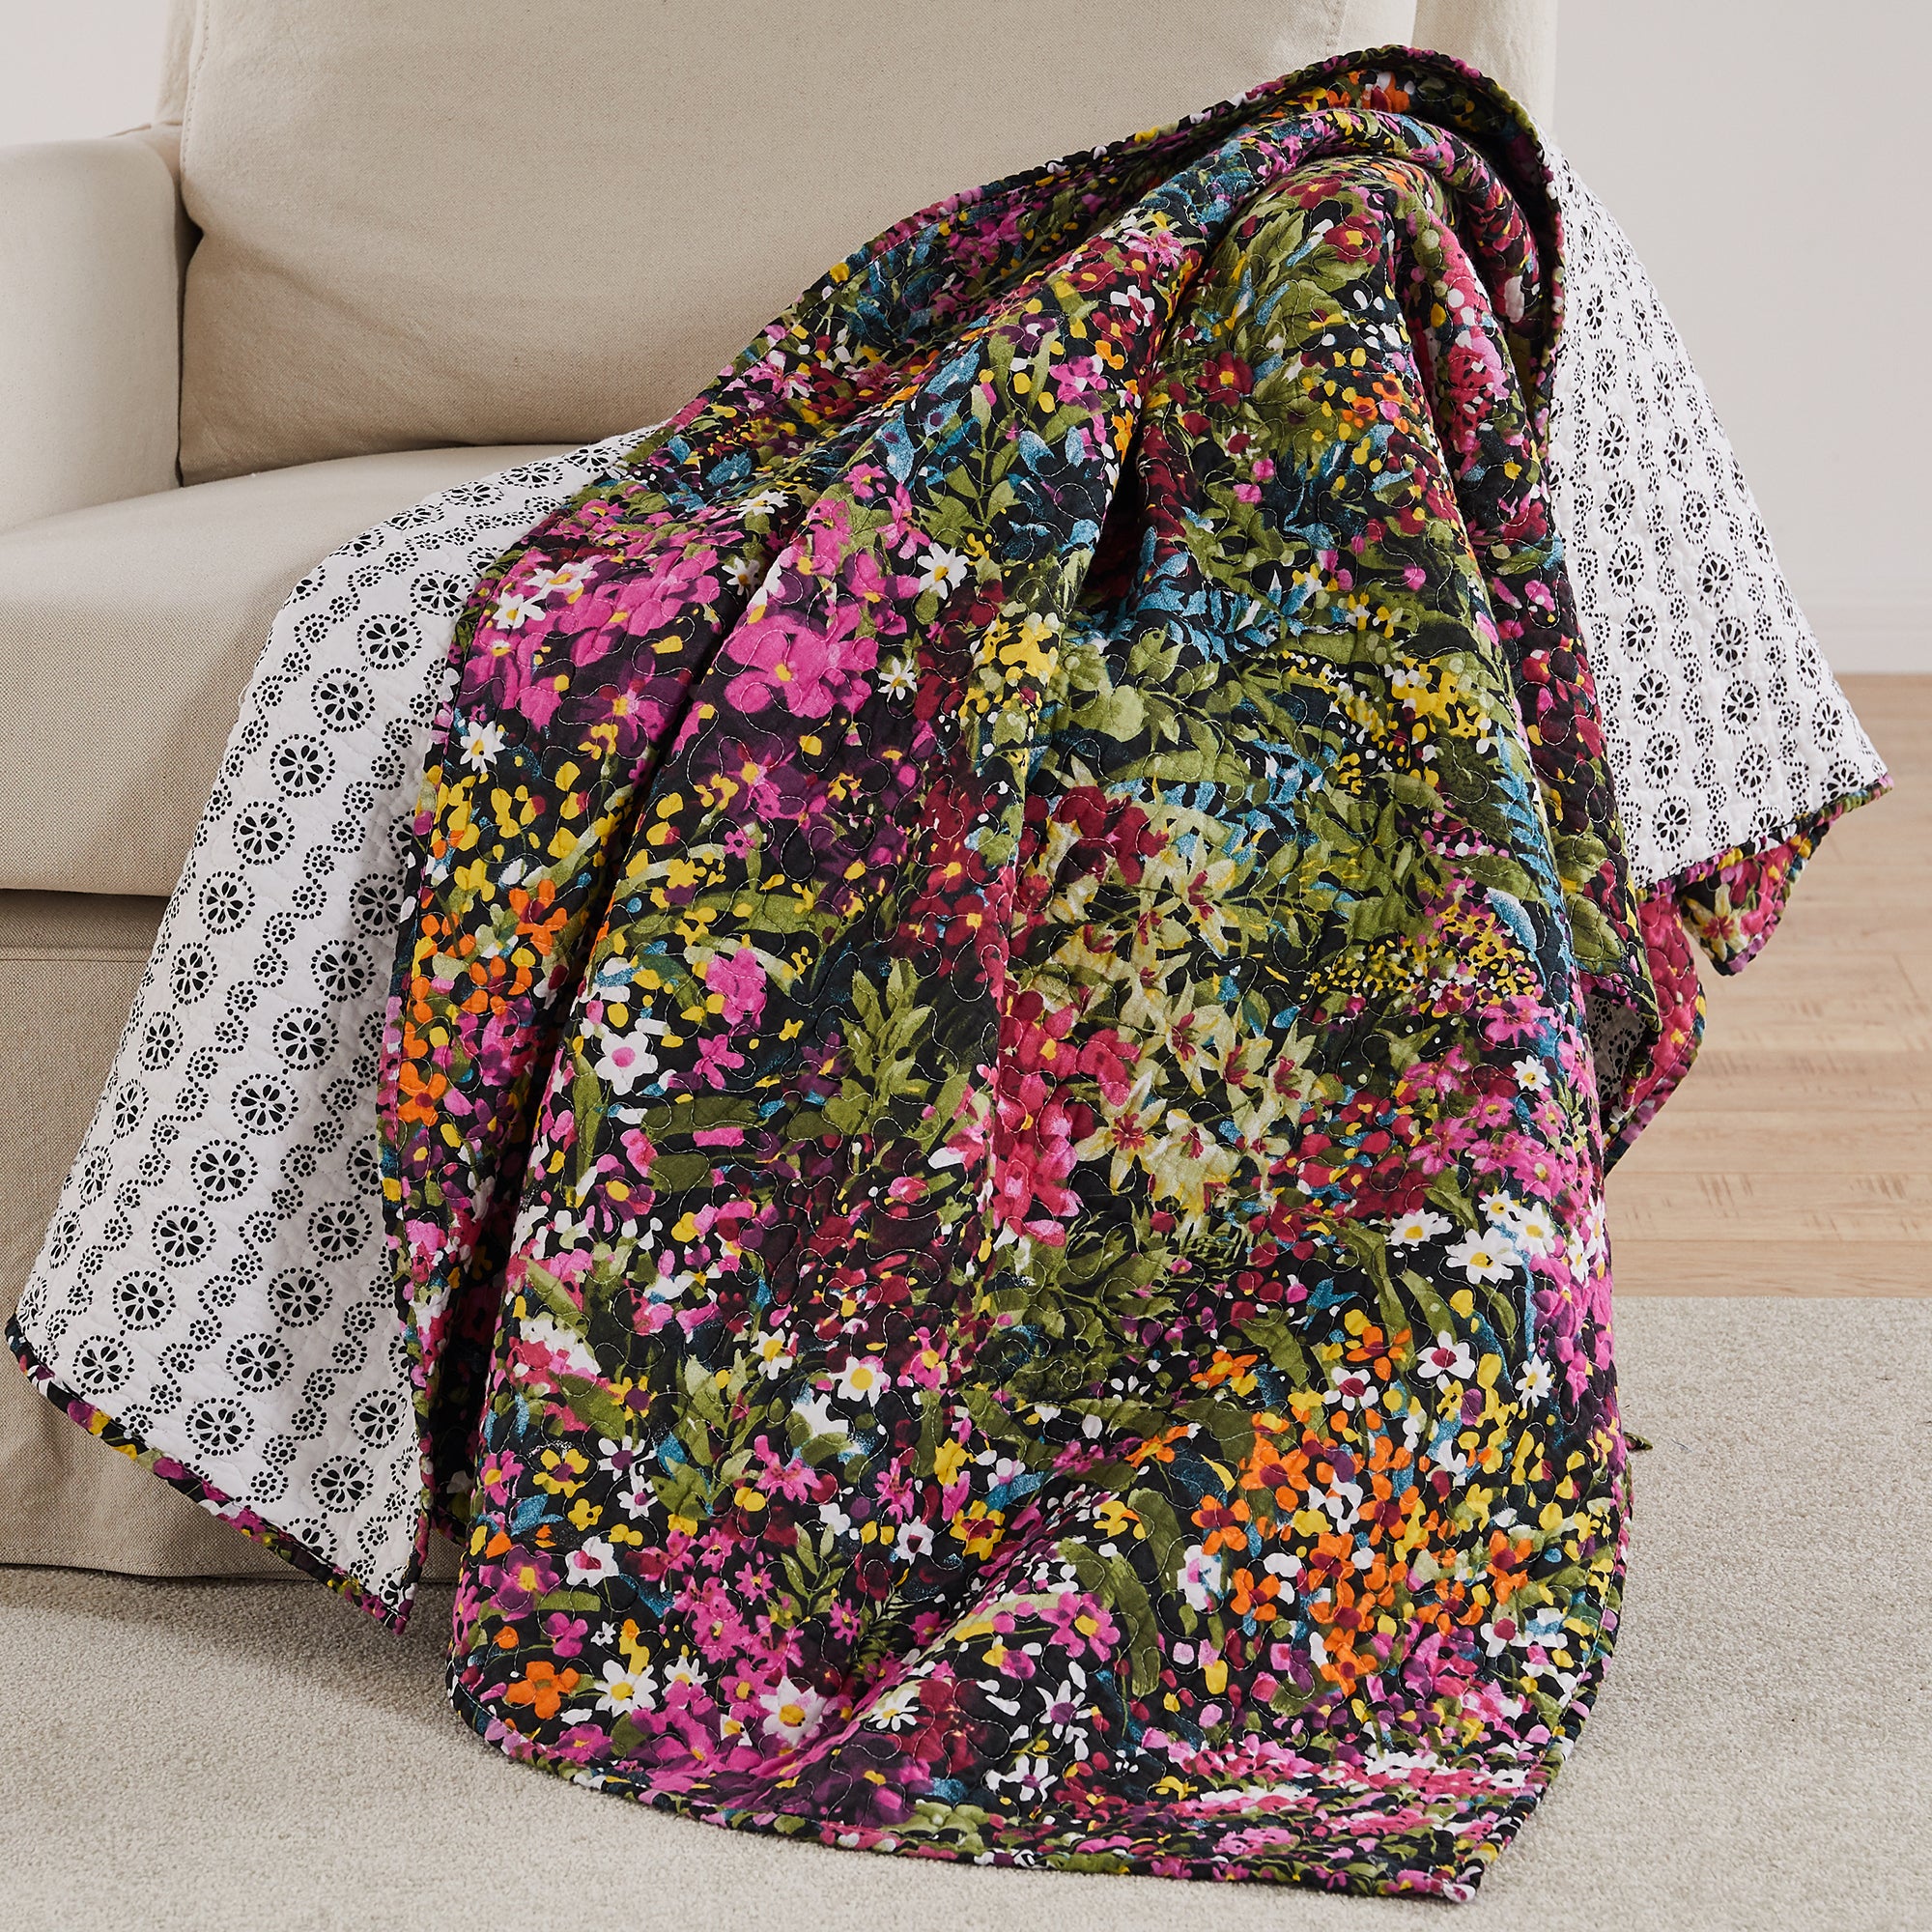 Basel Quilted Throw